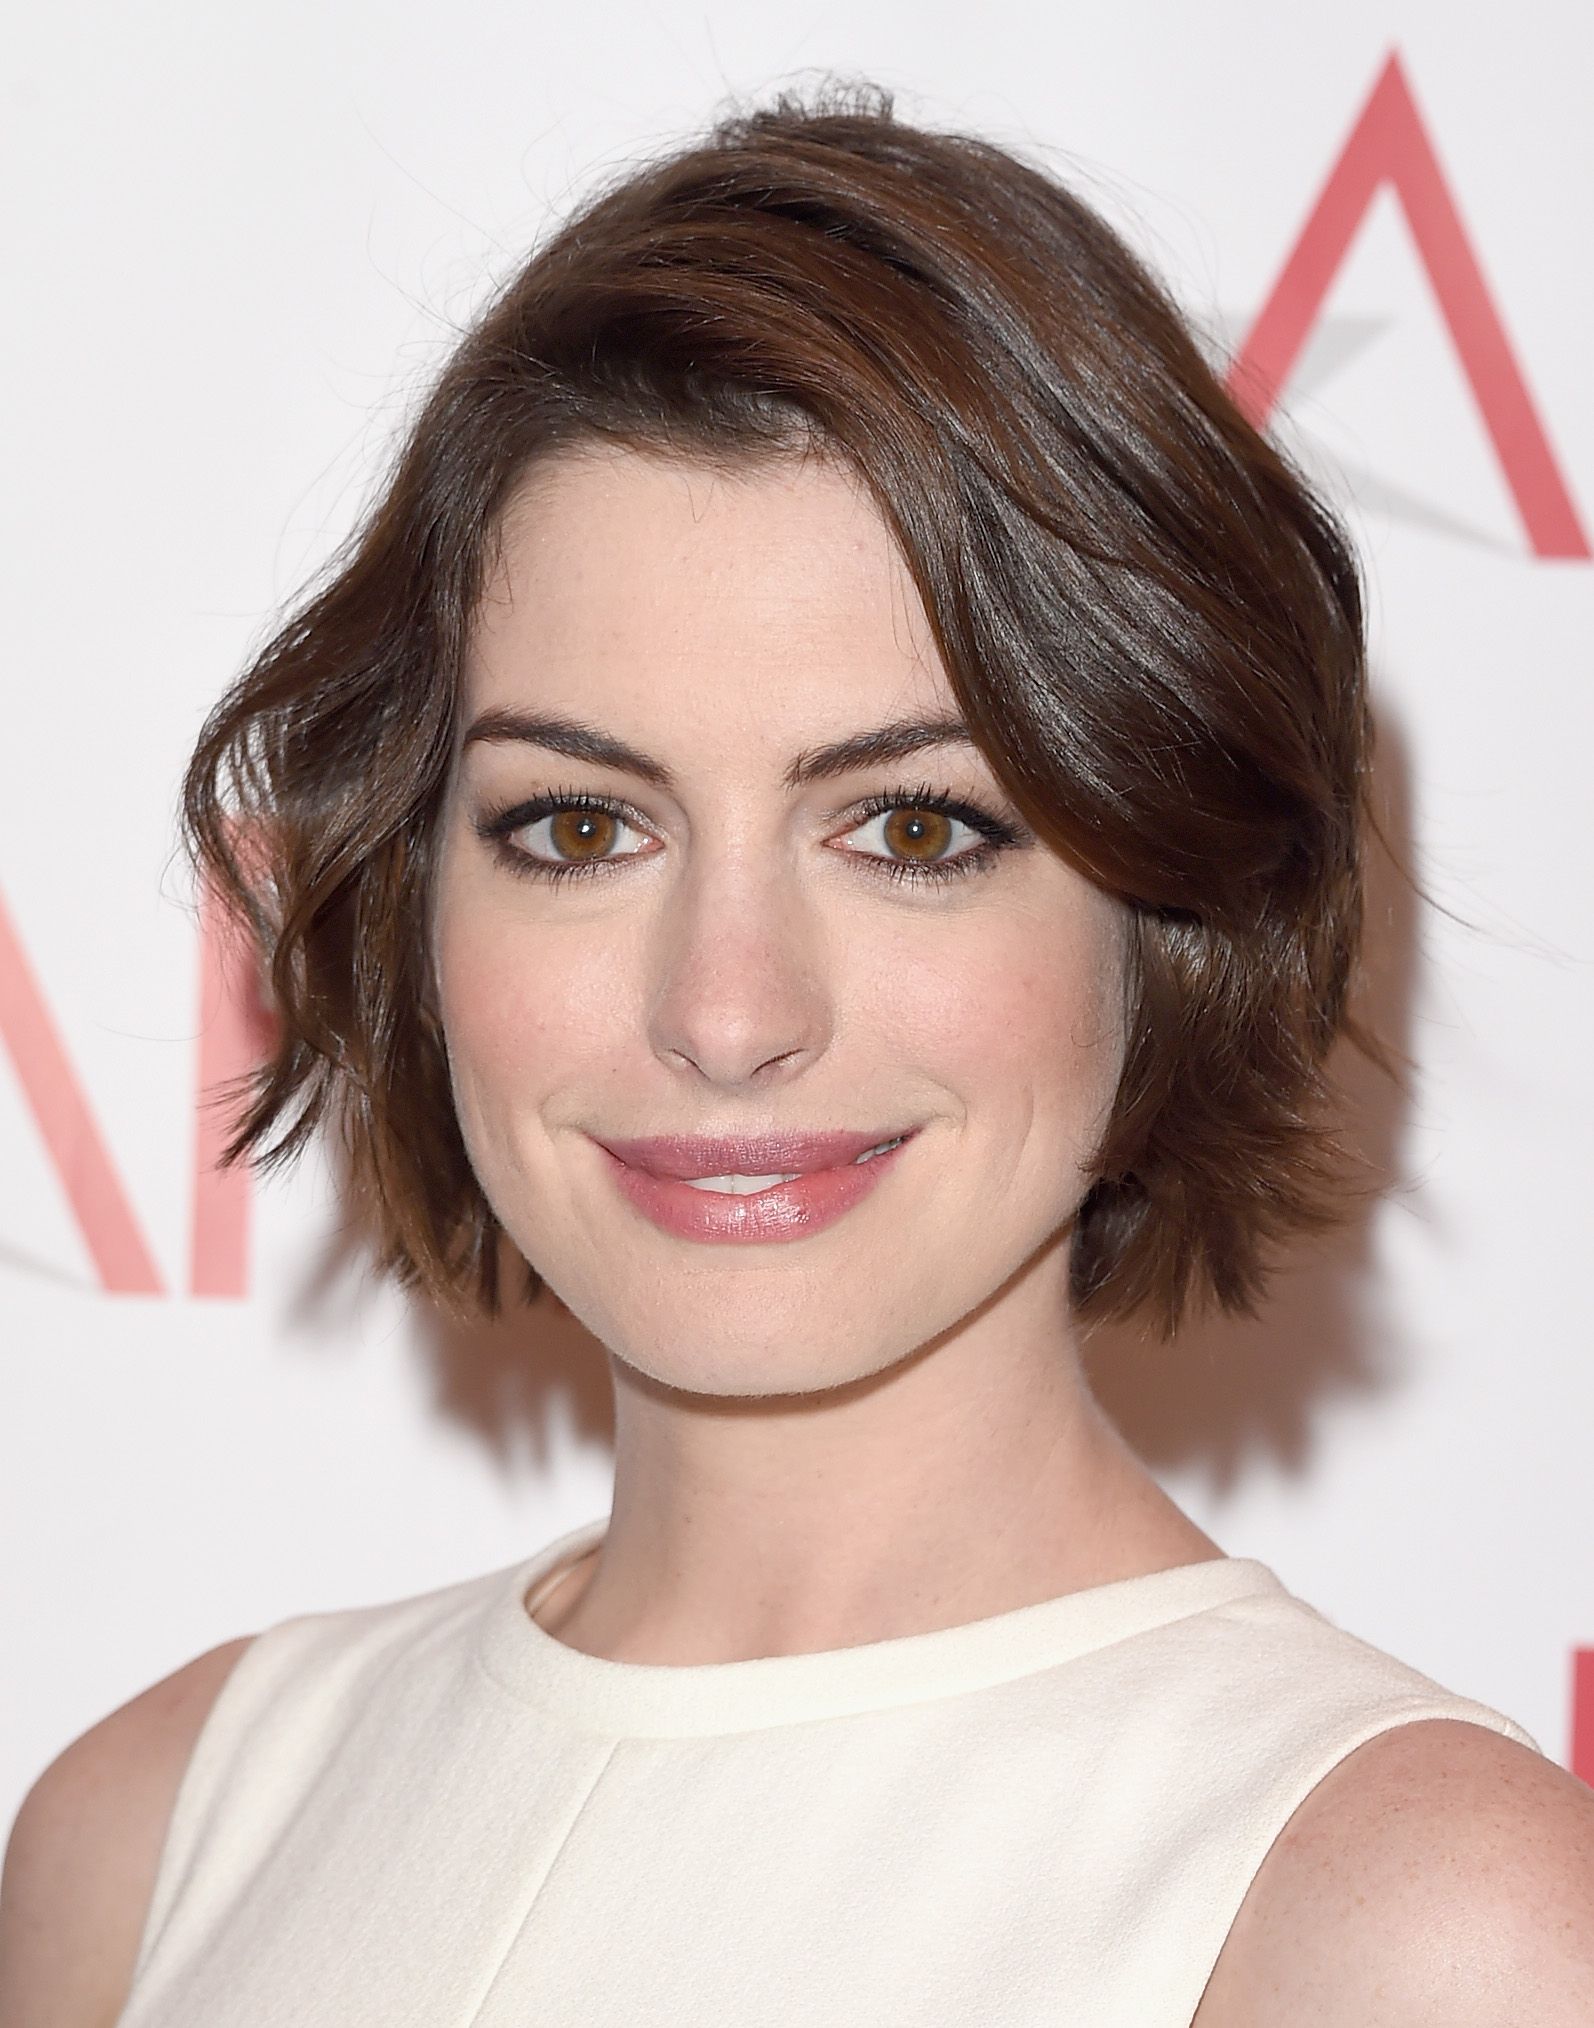 24 best haircuts for women over 30 - short hairstyle ideas